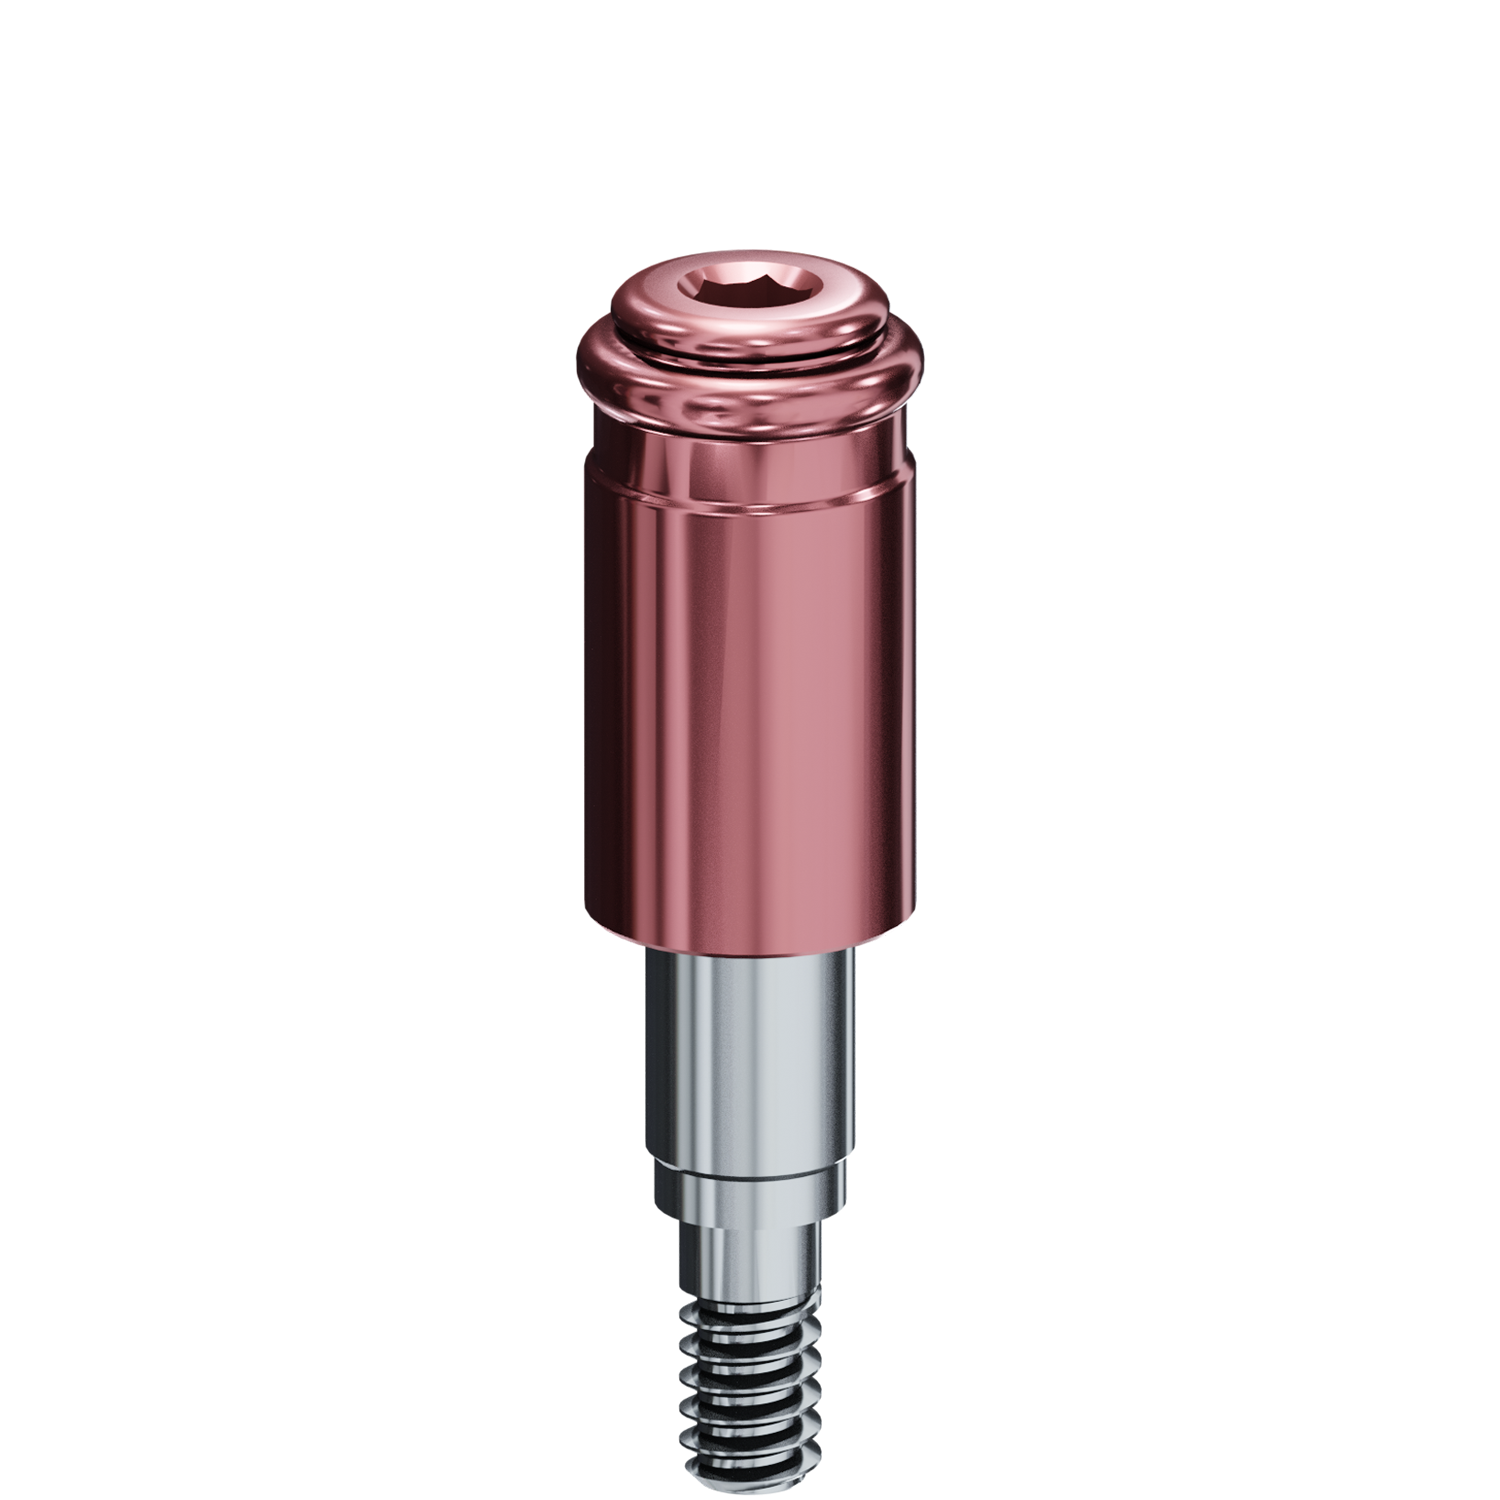 R-Tx Attachment System - 3.4mm Biomet 3i® Certain Connection - 048" Drive - 1.0mm